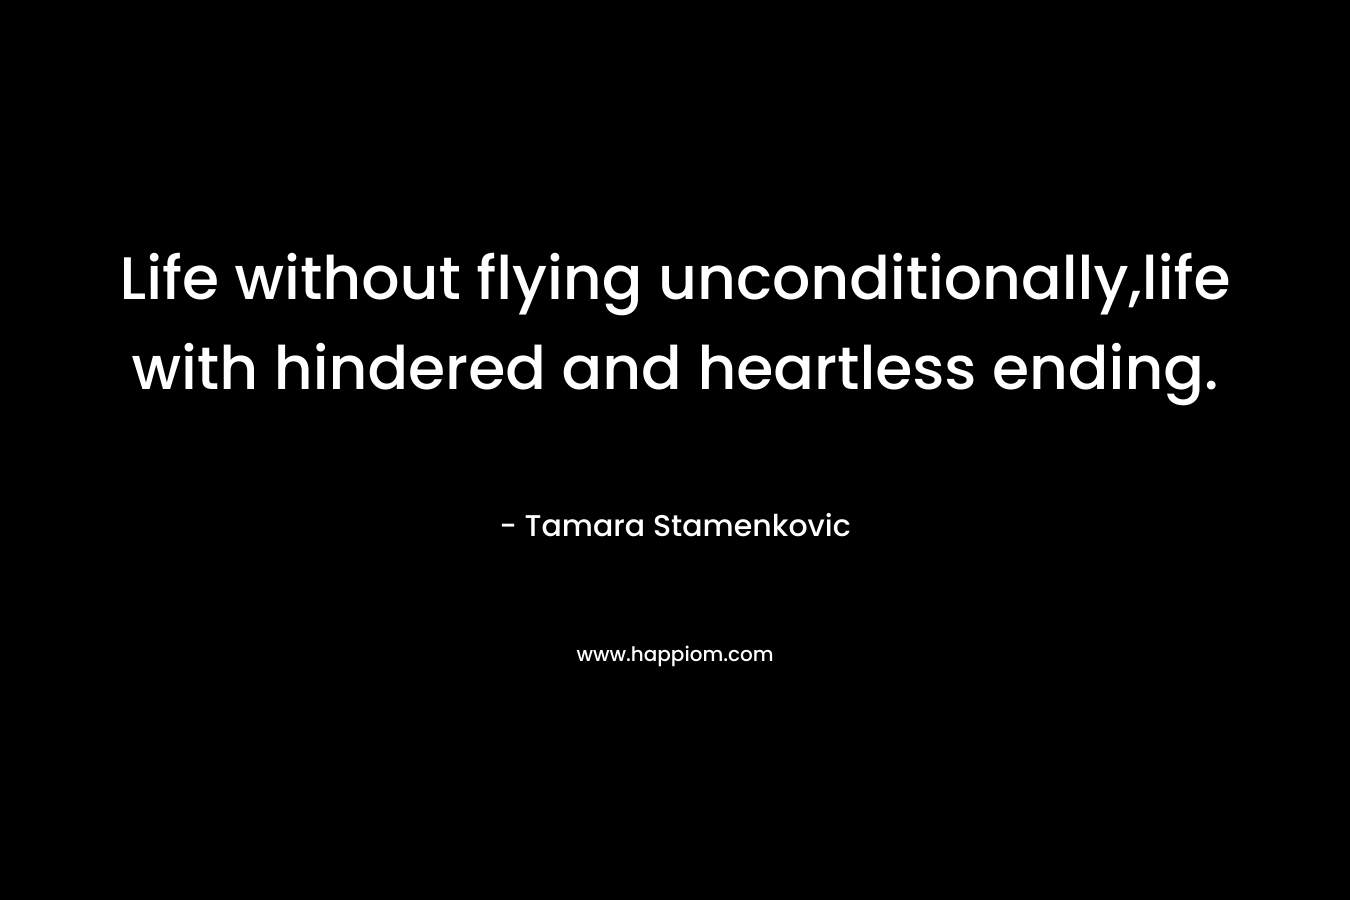 Life without flying unconditionally,life with hindered and heartless ending. – Tamara Stamenkovic